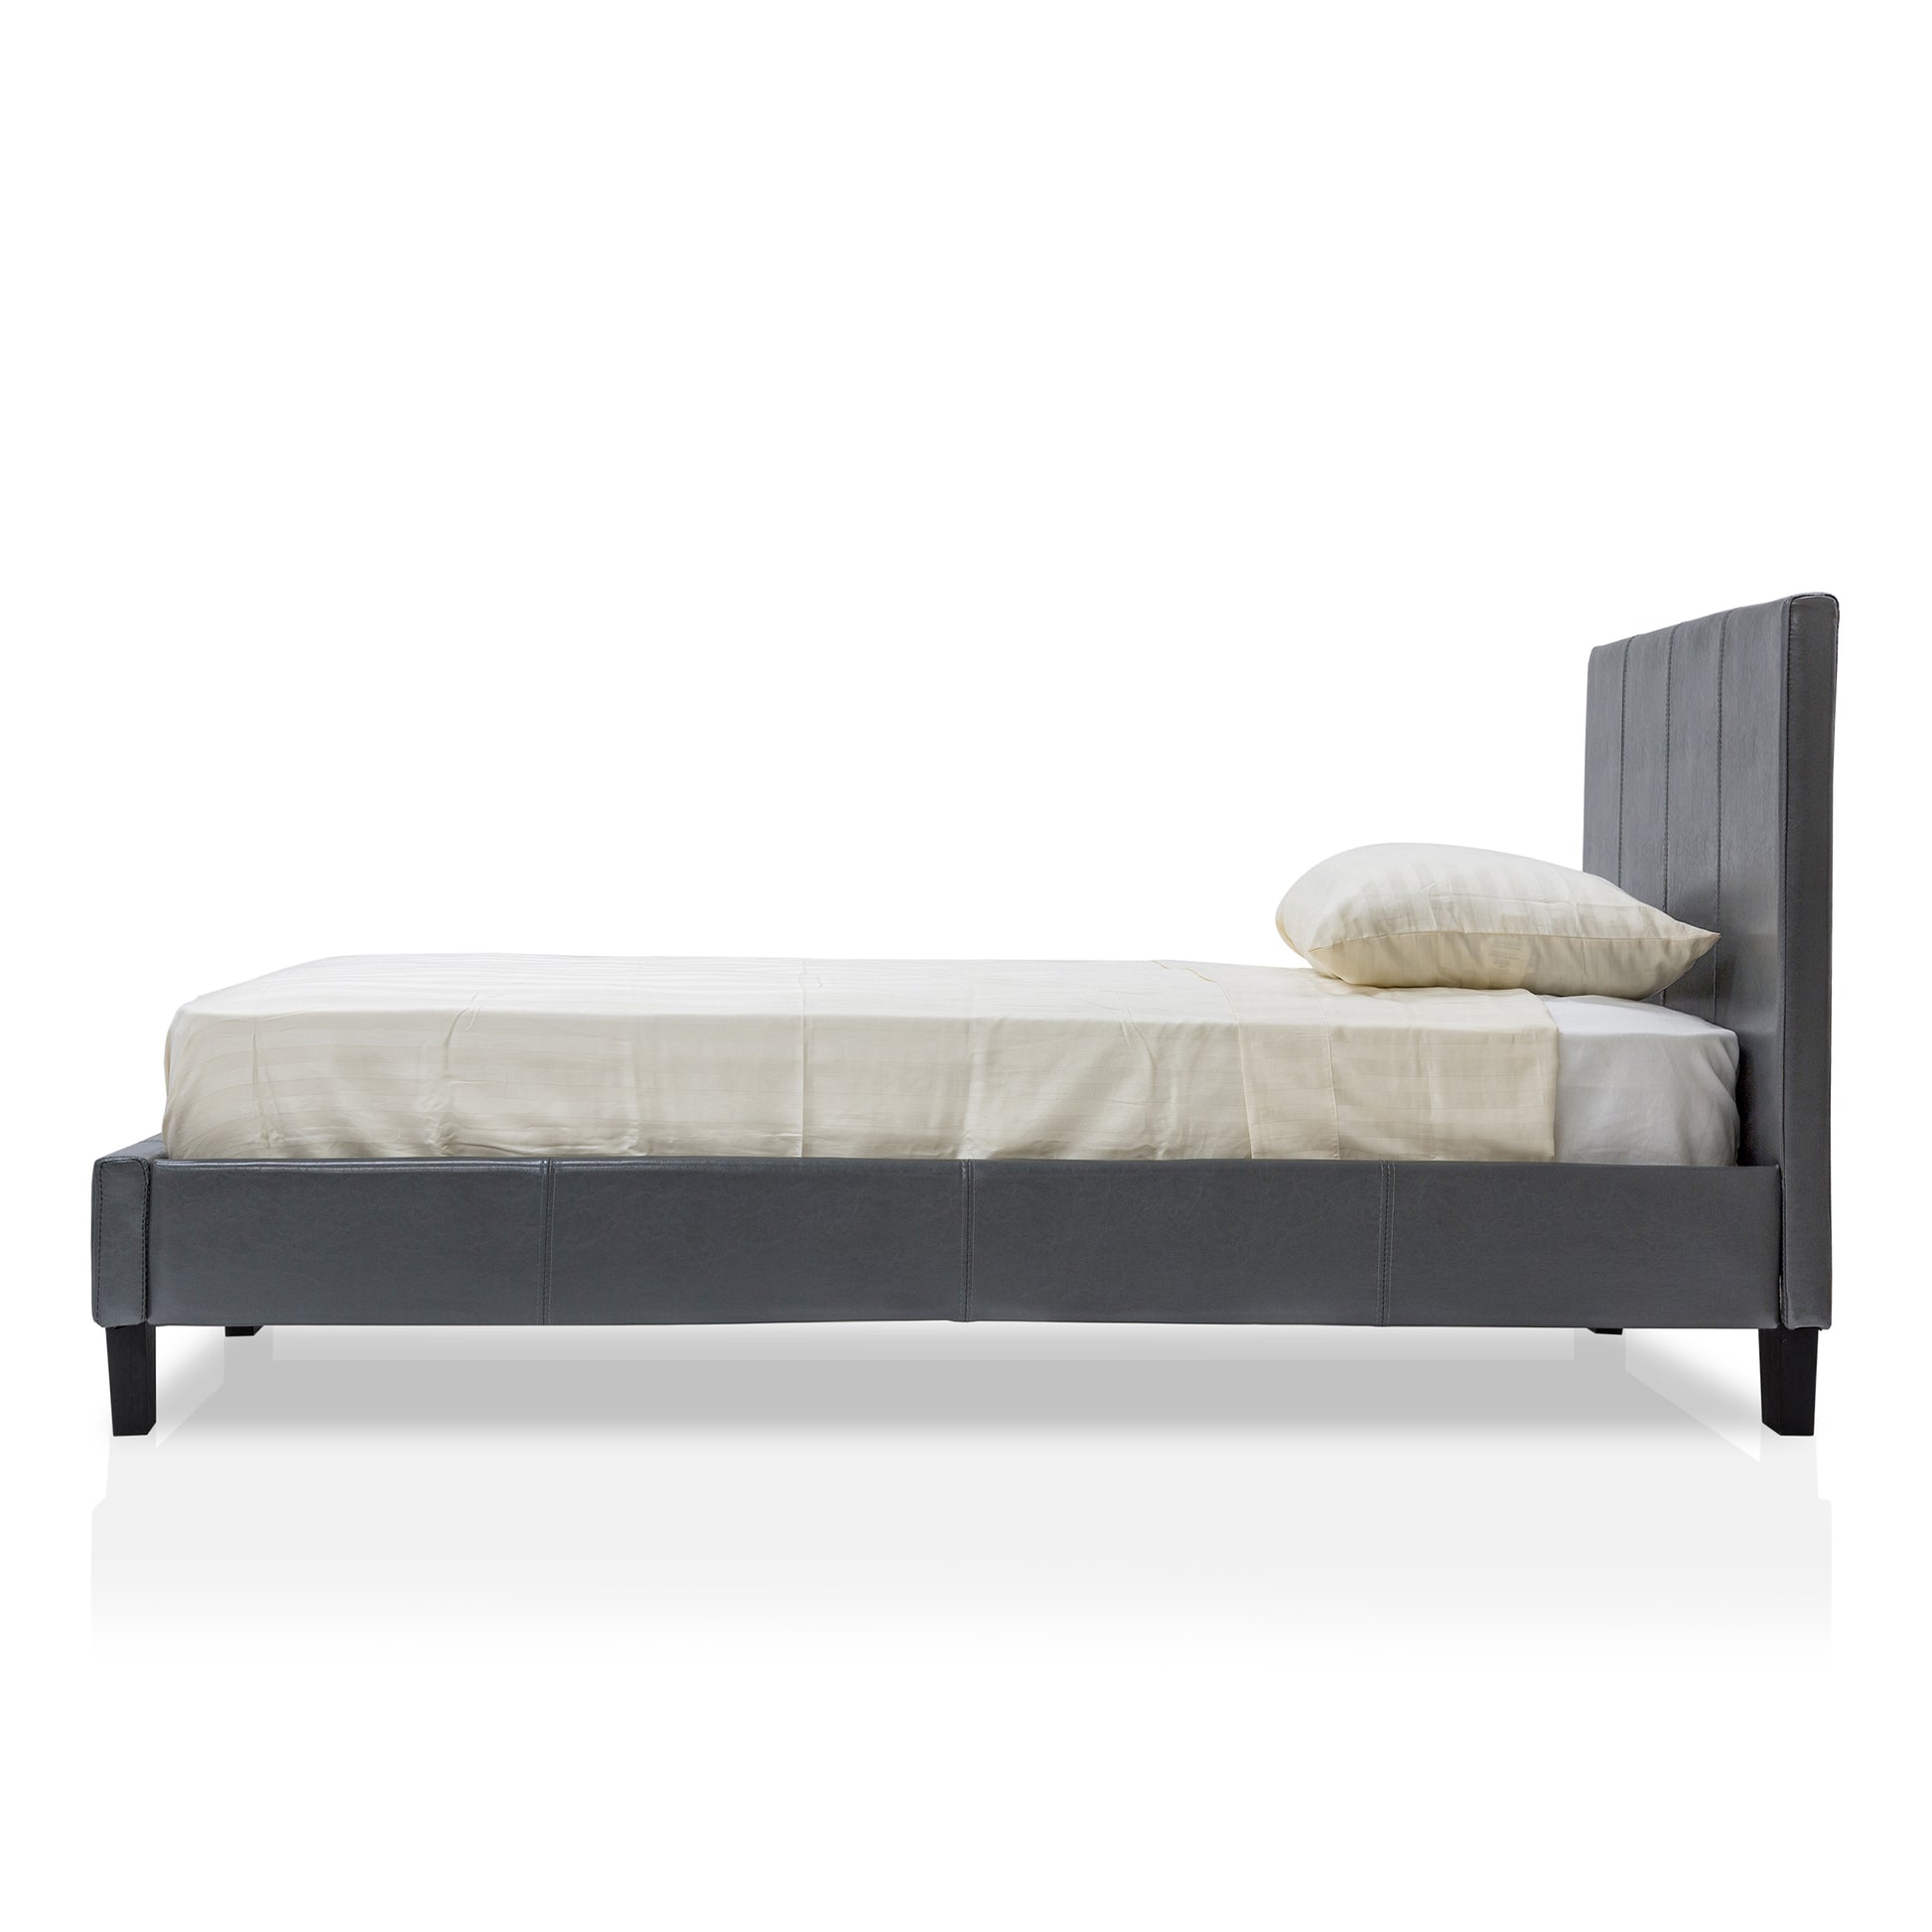 Front-facing side view of a contemporary gray faux leather twin platform bed with linens on a white background